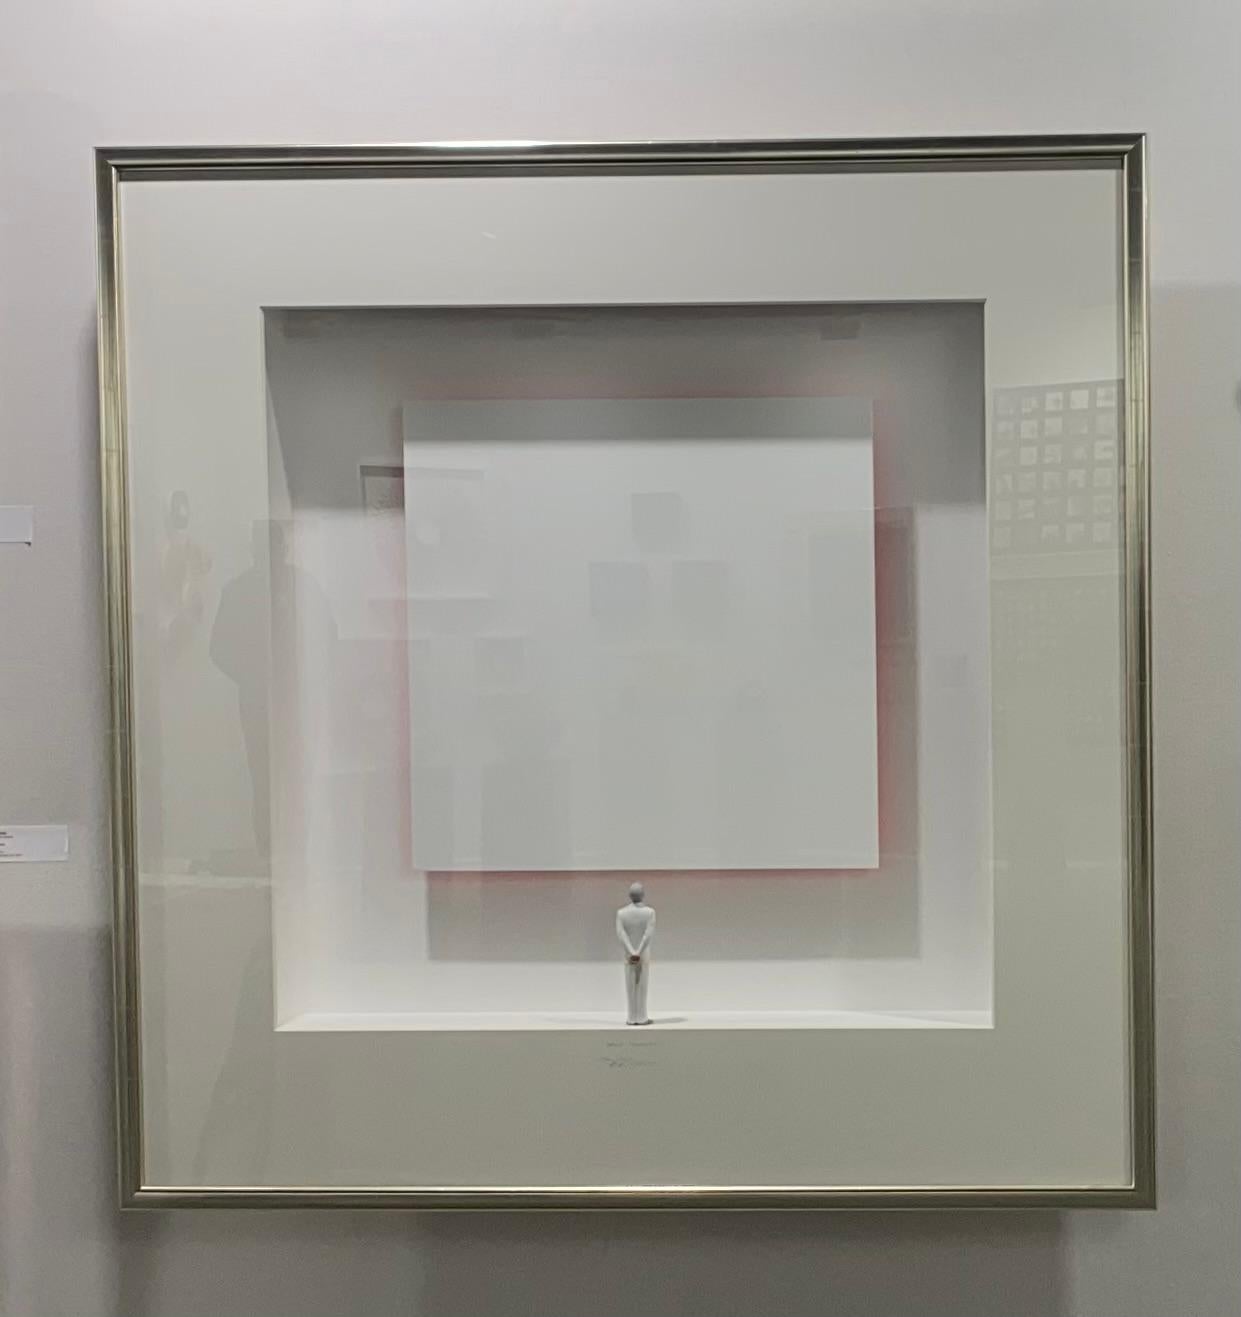 Great Reflection - contemporary minimalist artwork white canvas with reflection - Assemblage Mixed Media Art by Volker Kuhn